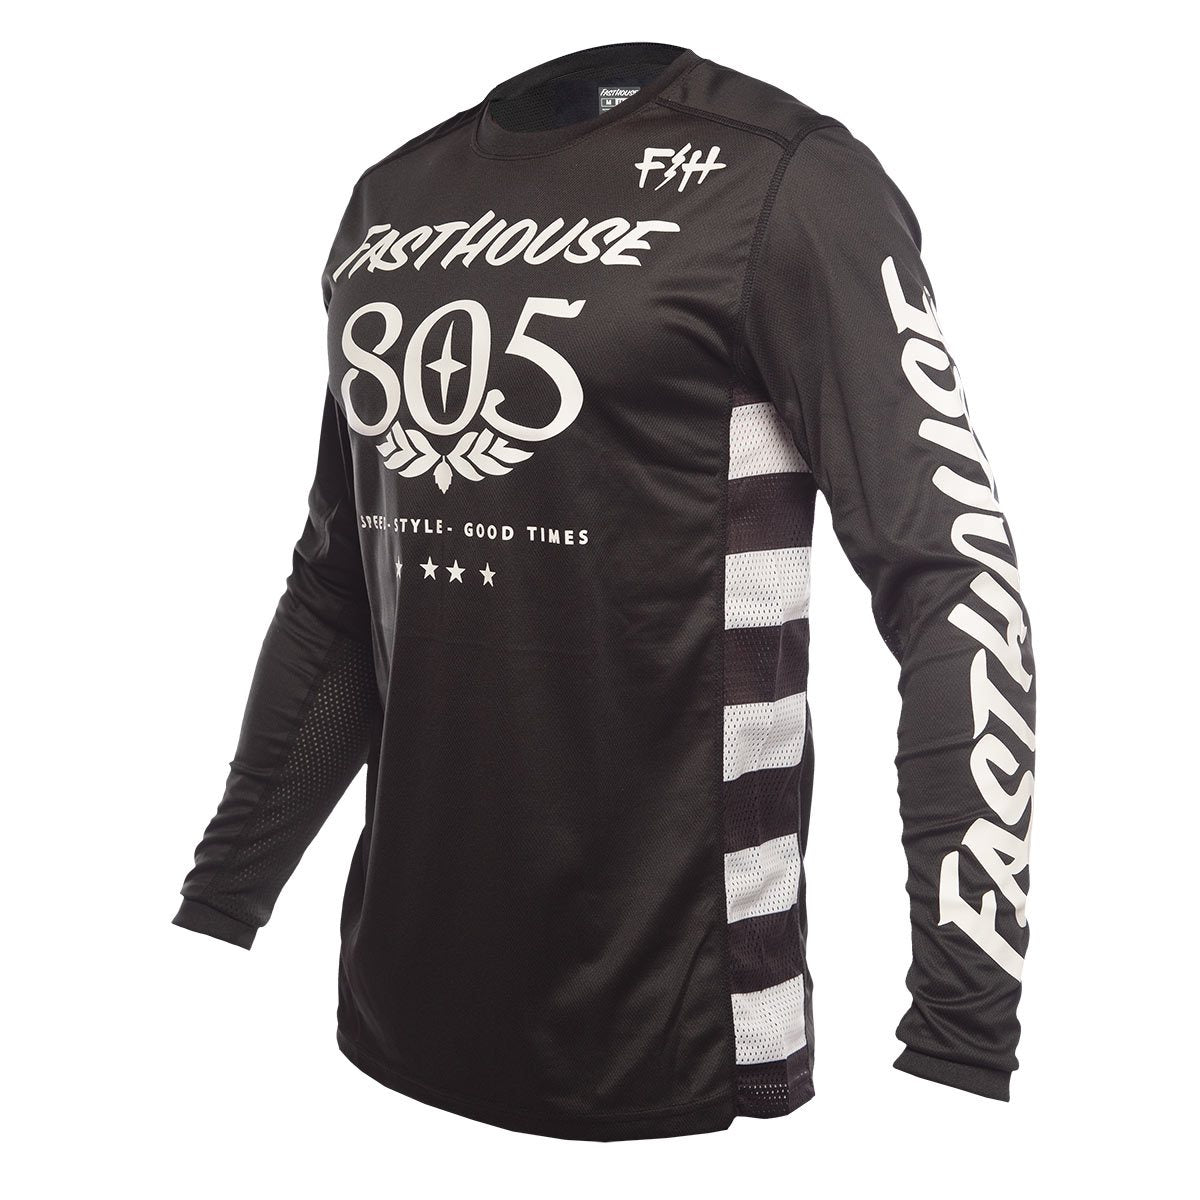 CLASSIC LS 805 JERSEY - FAST HOUSE